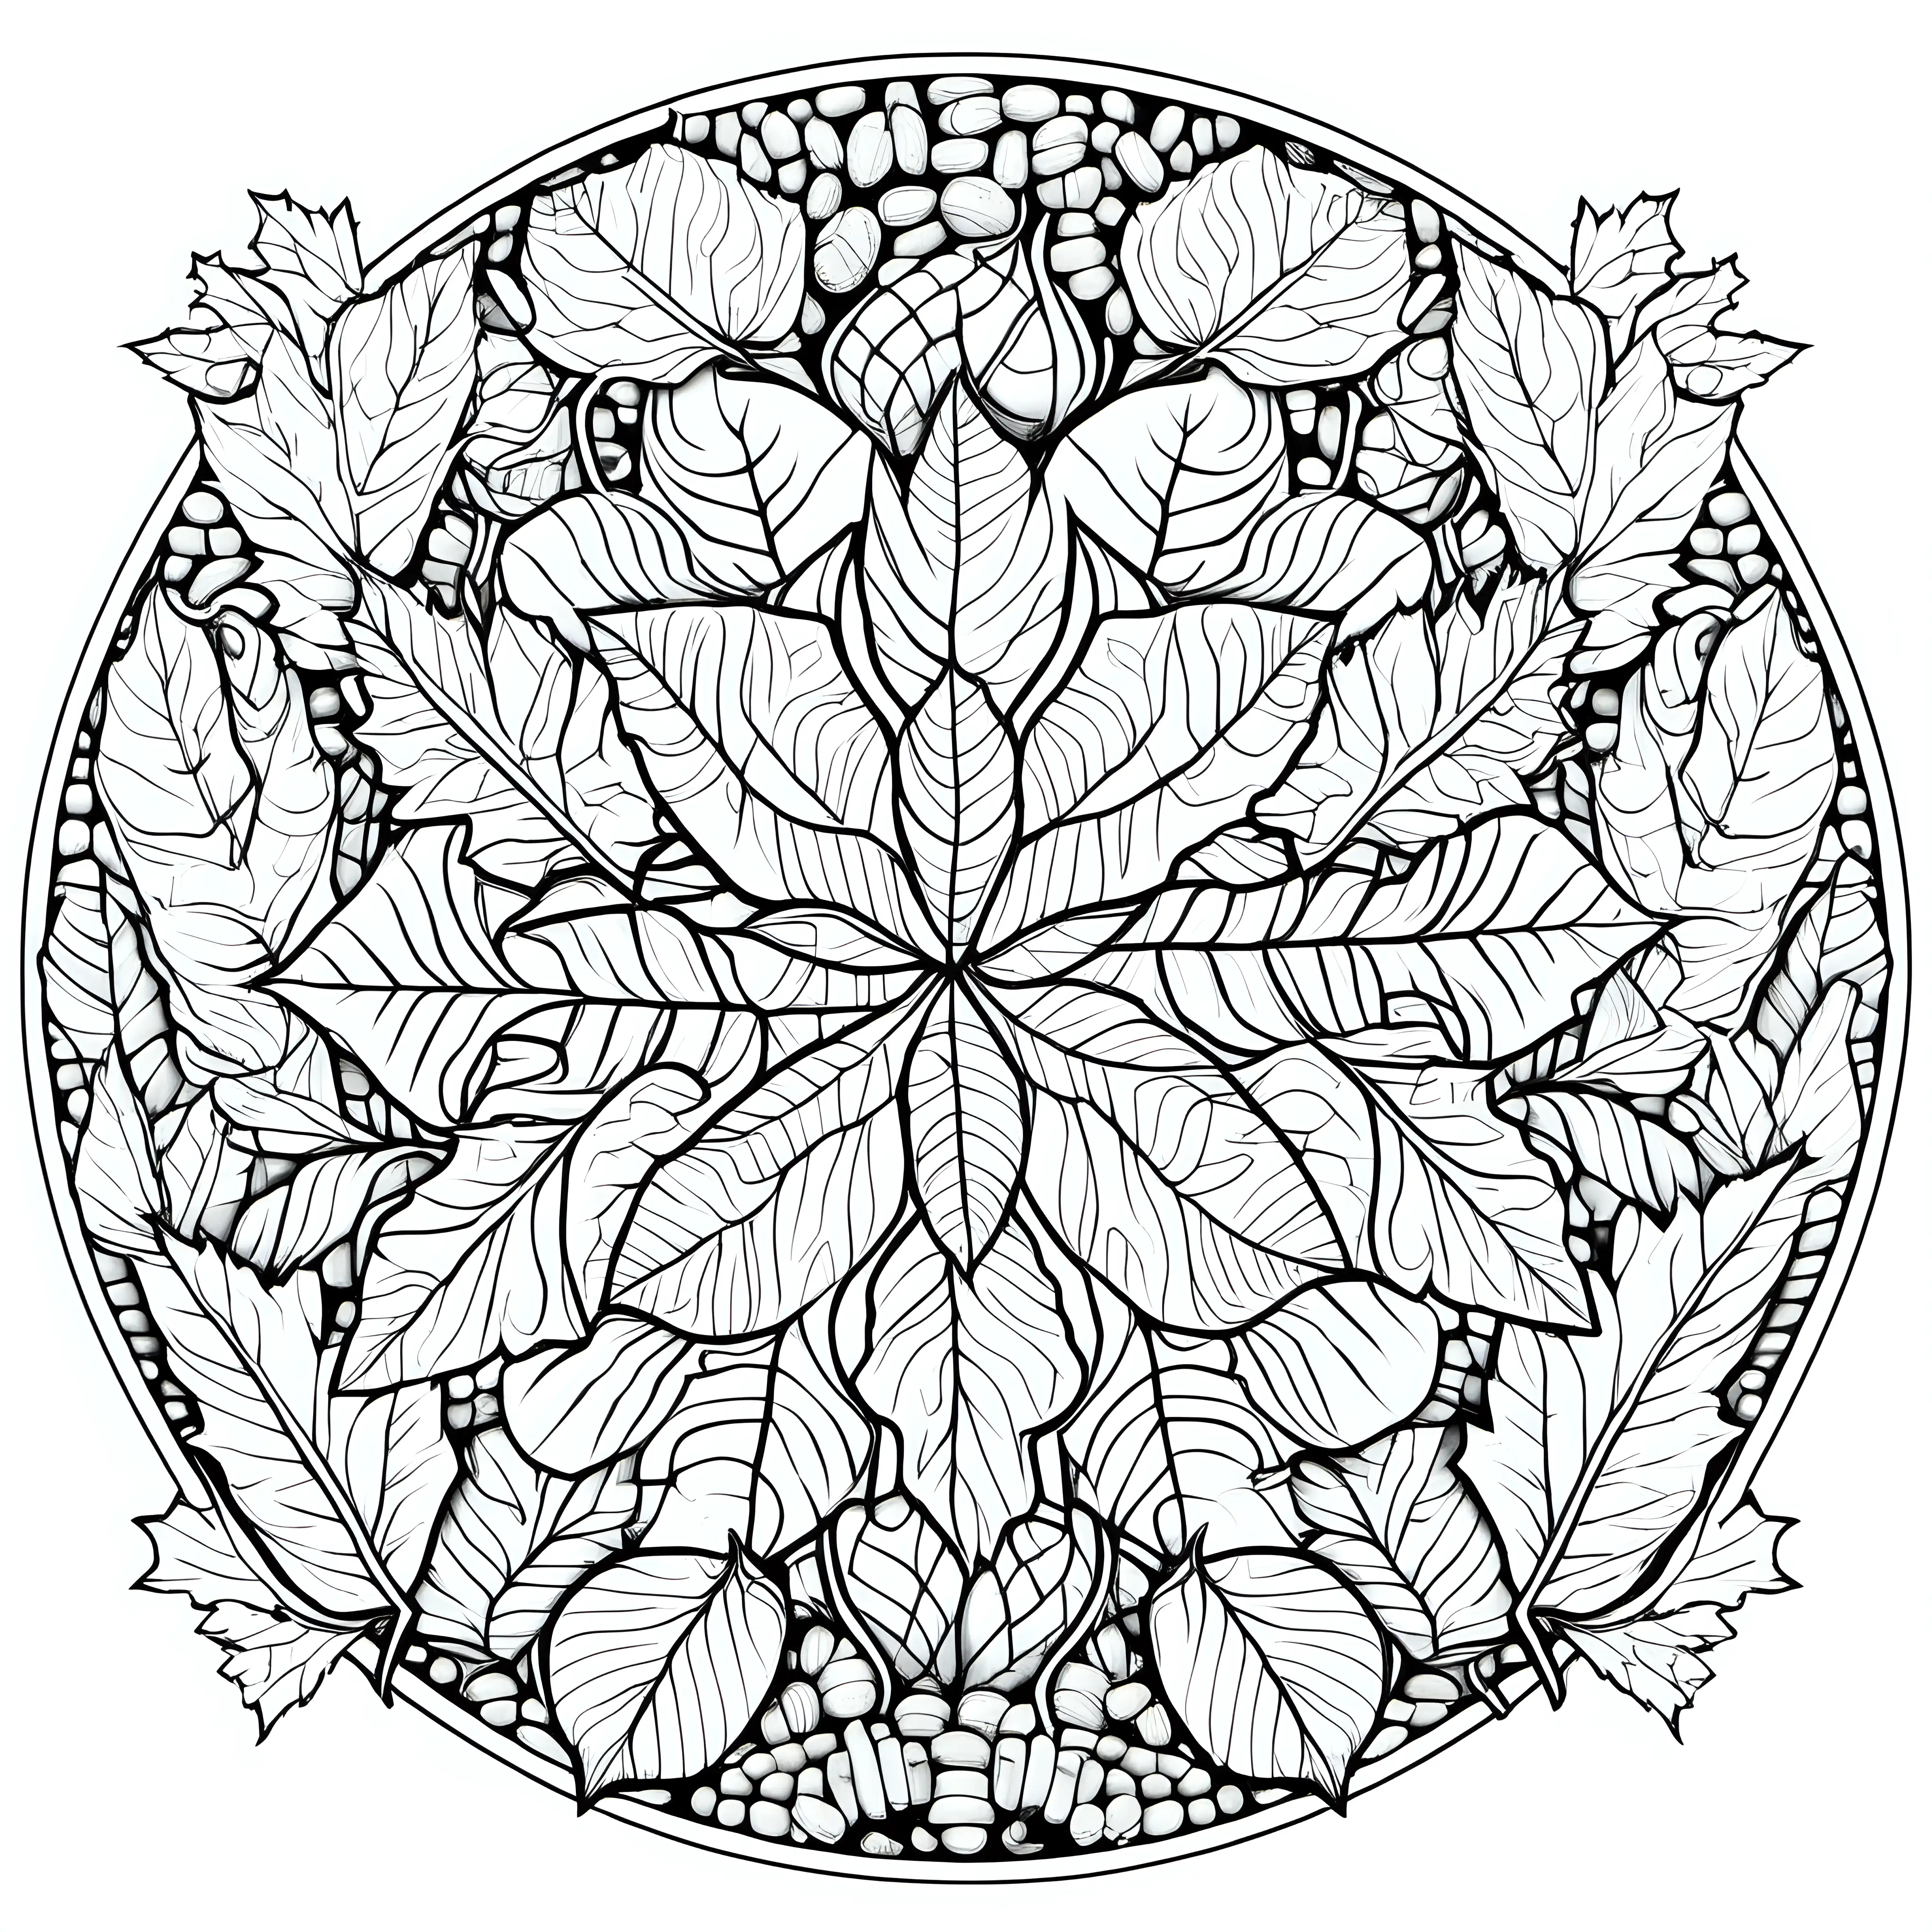 Fall Foliage Mandala Coloring Page Relaxing Autumn Leaves and Acorns Design